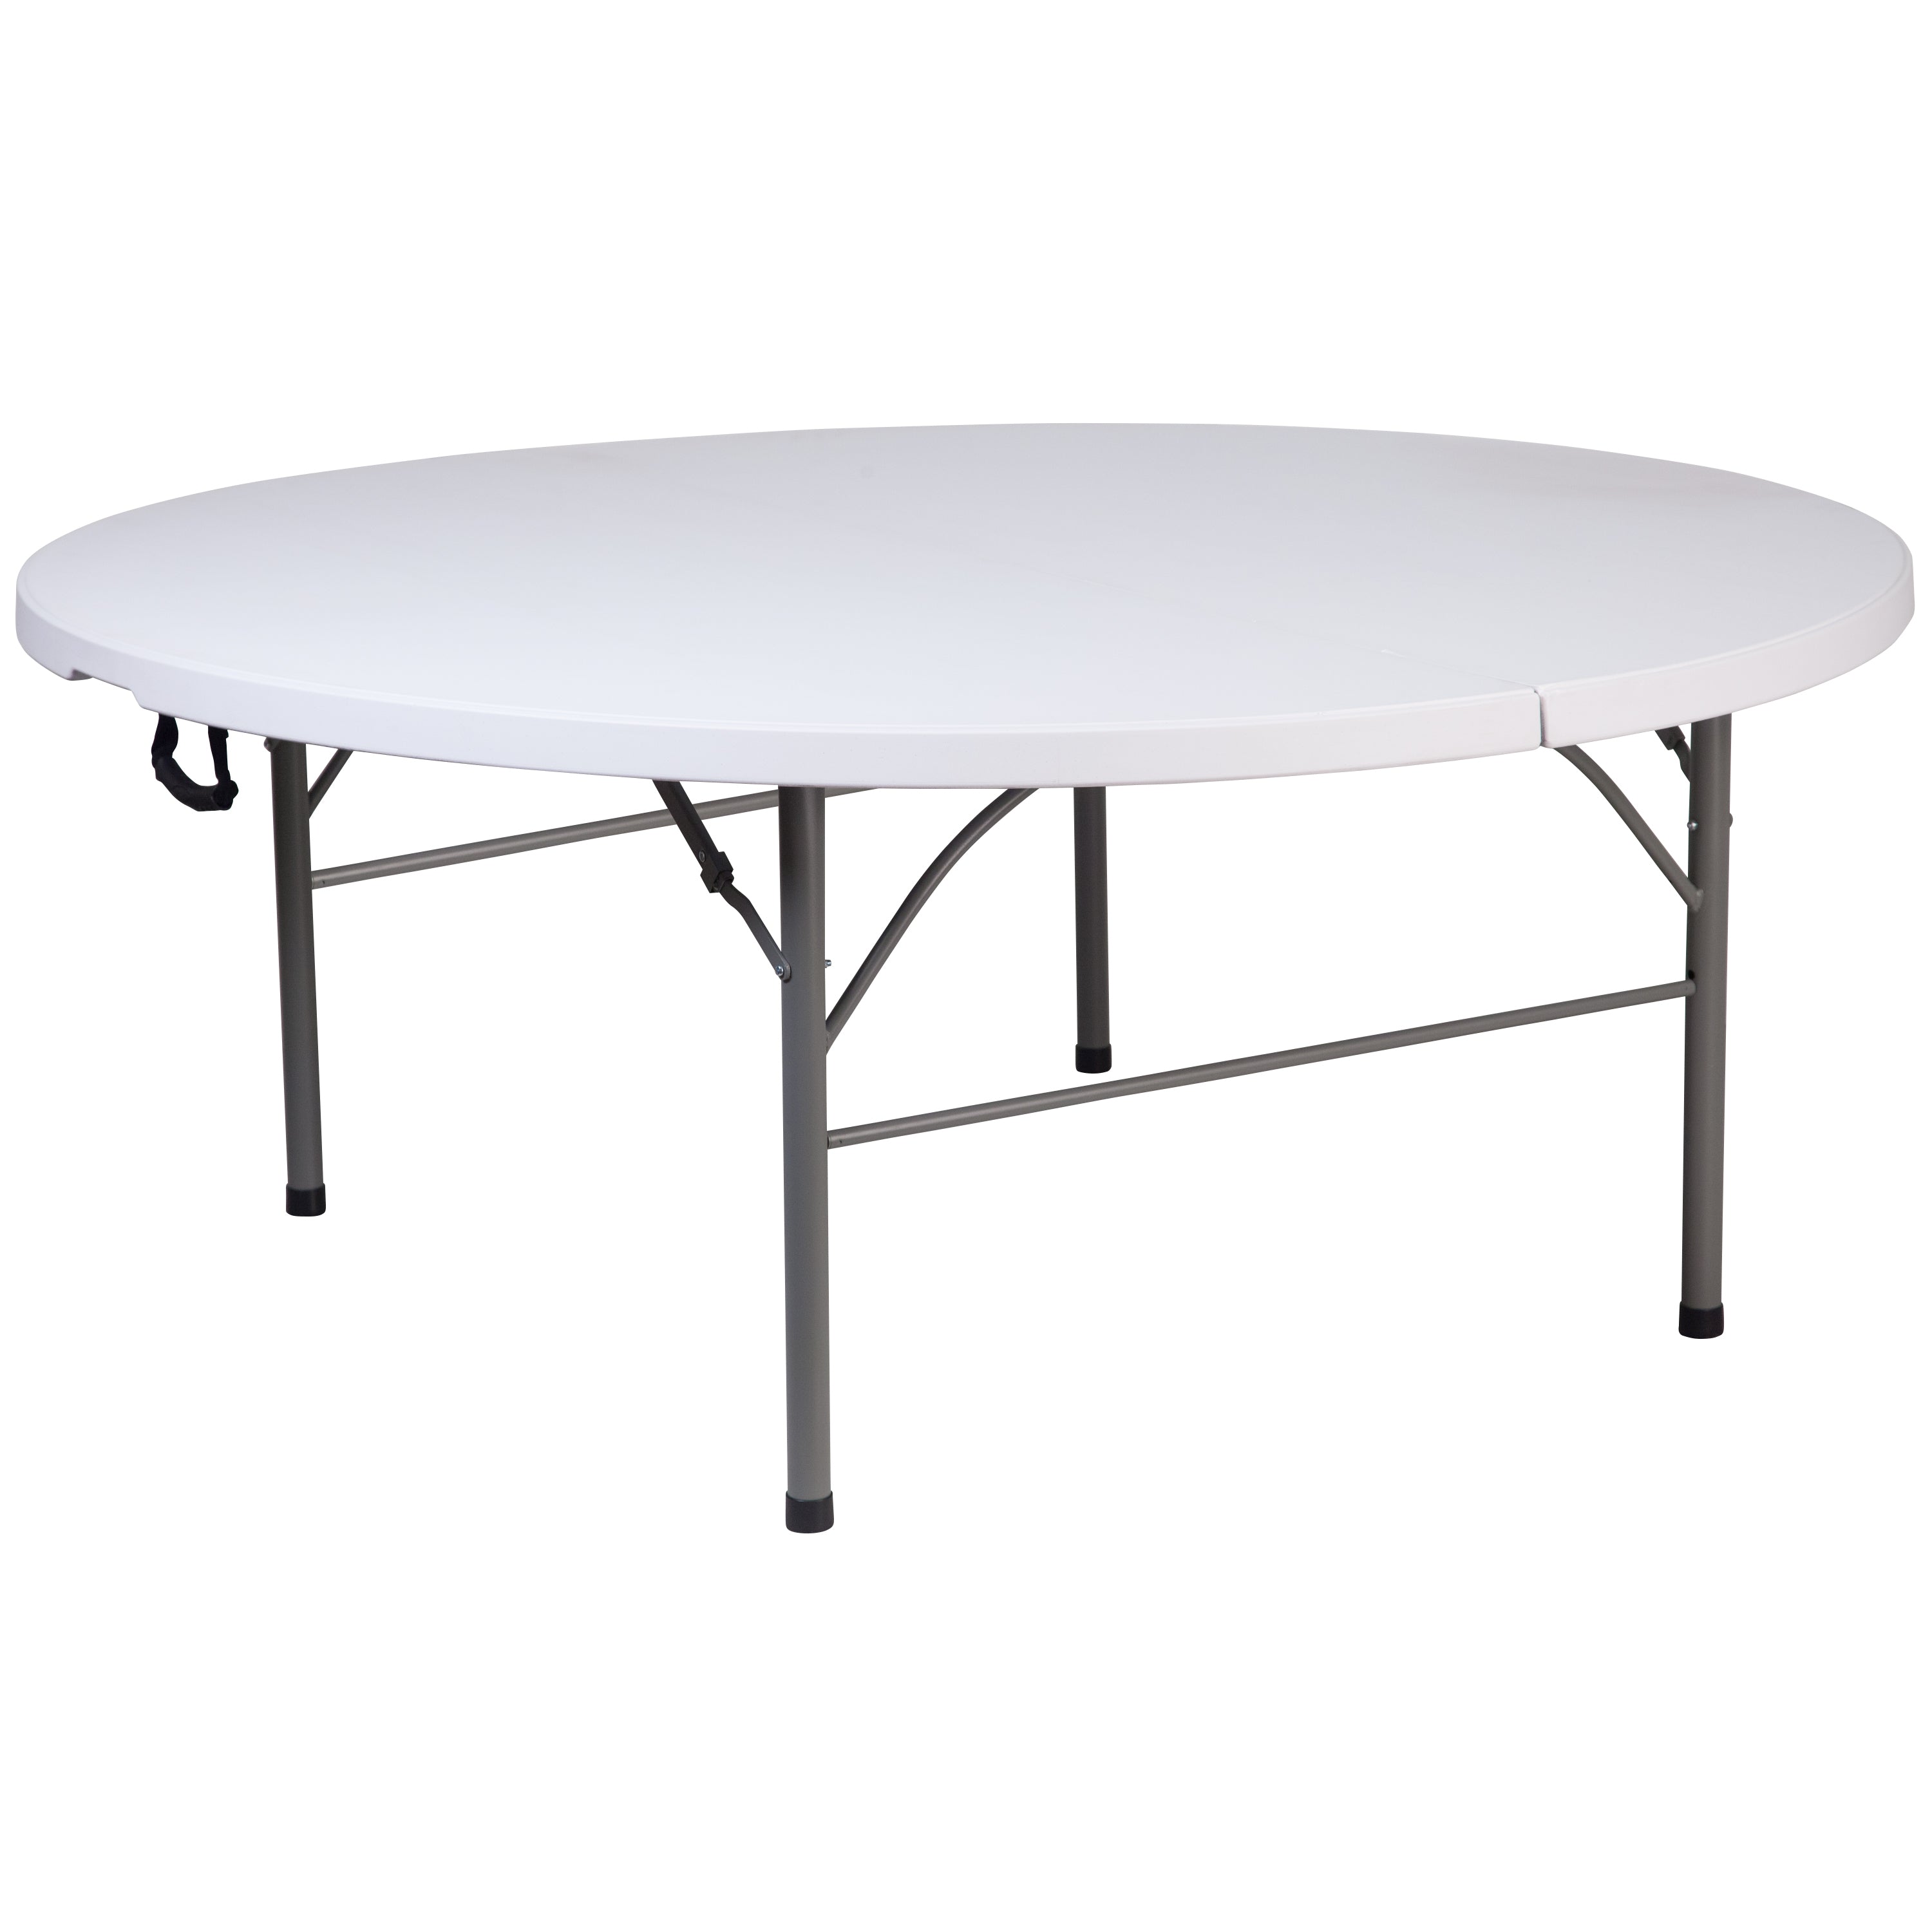 5.89-Foot Round Bi-Fold Plastic Banquet and Event Folding Table with Carrying Handle-Round Plastic Folding Table-Flash Furniture-Wall2Wall Furnishings